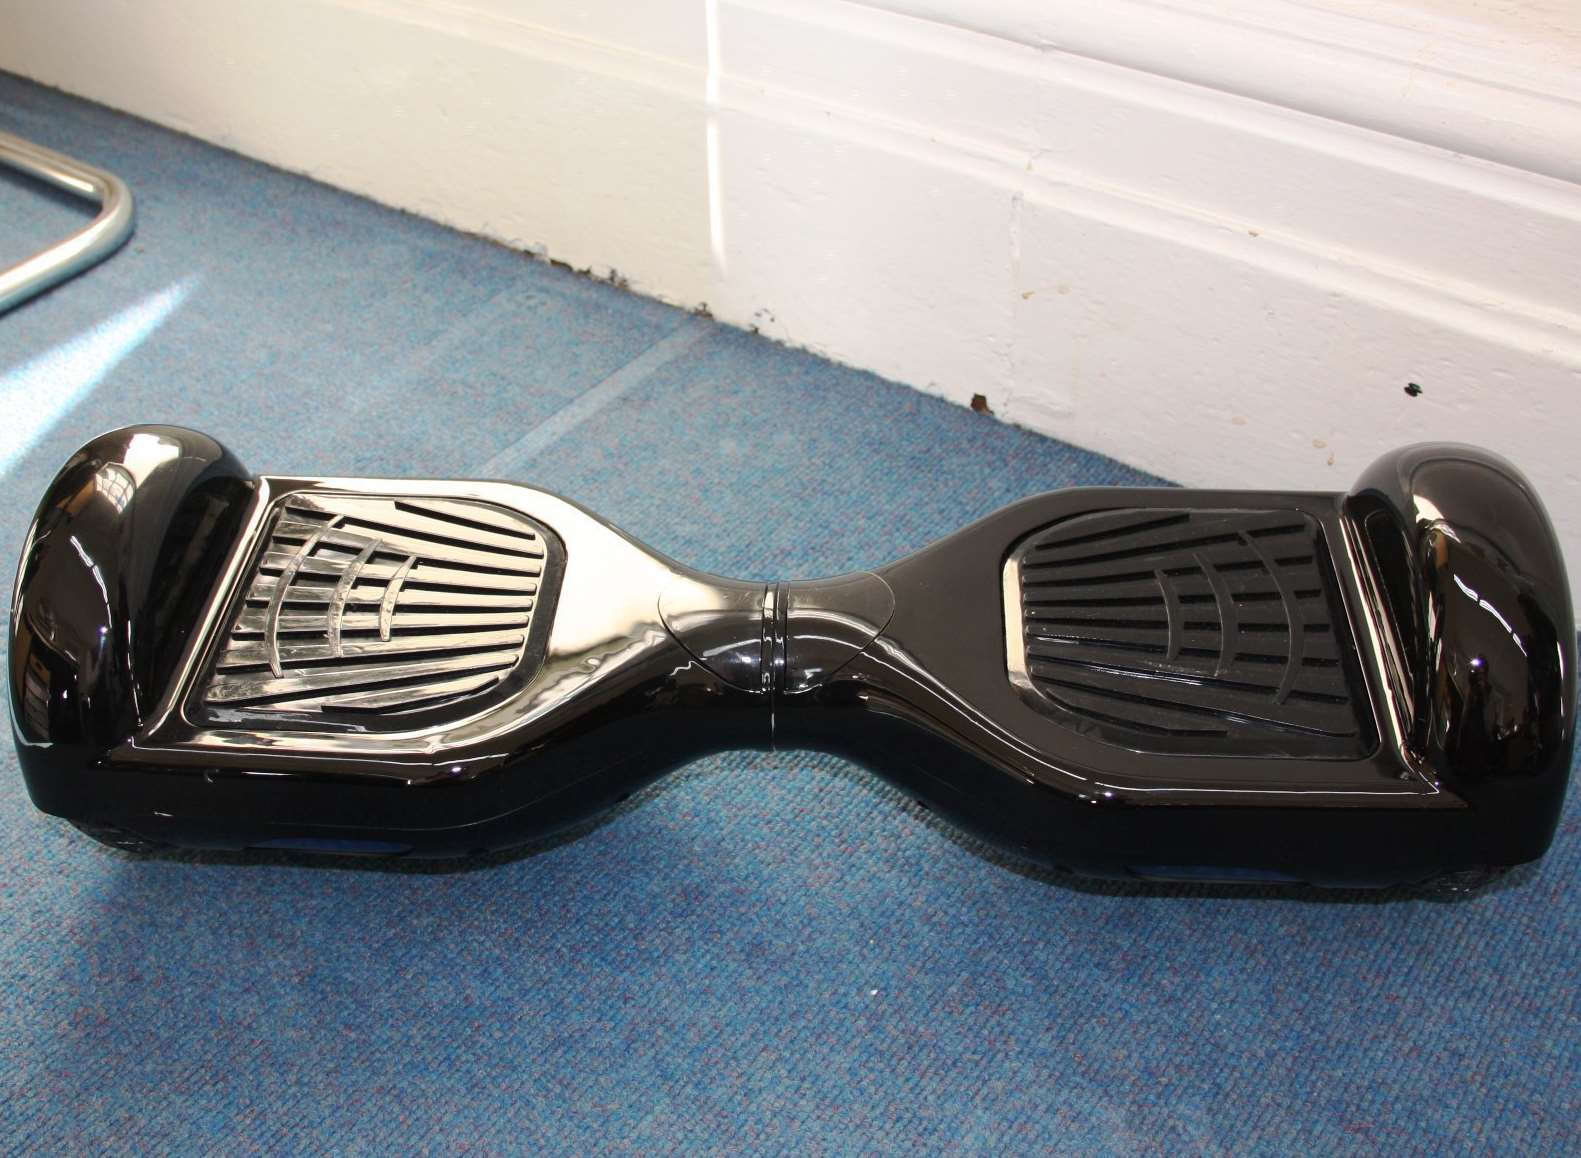 Residents are being warned against buying knock-off hoverboards which could be dangerous